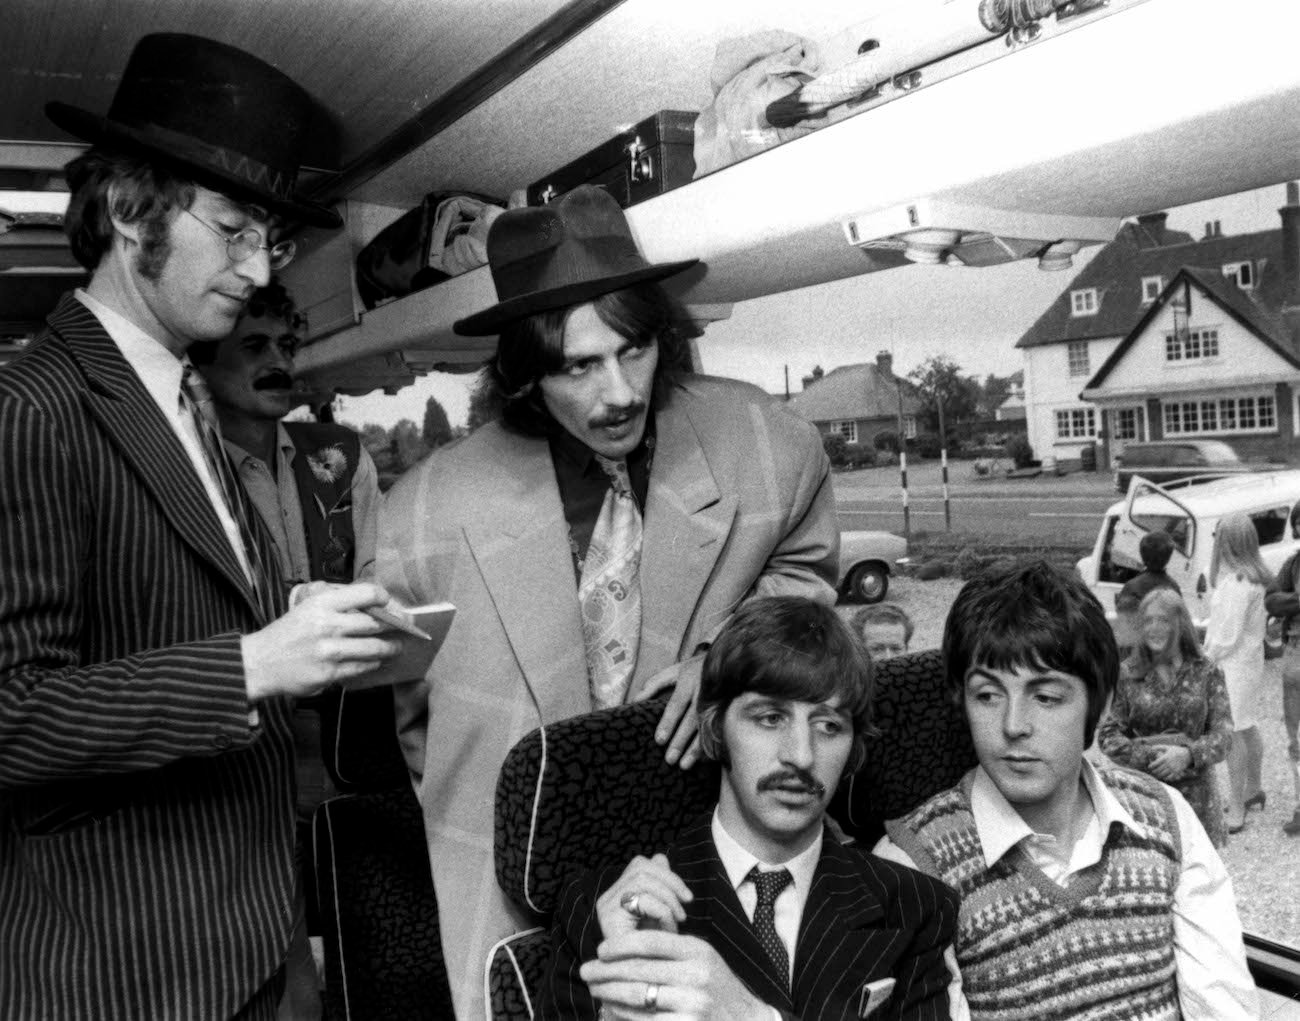 The Beatles on a bus during the filming of 'Magical Mystery Tour' in 1967.